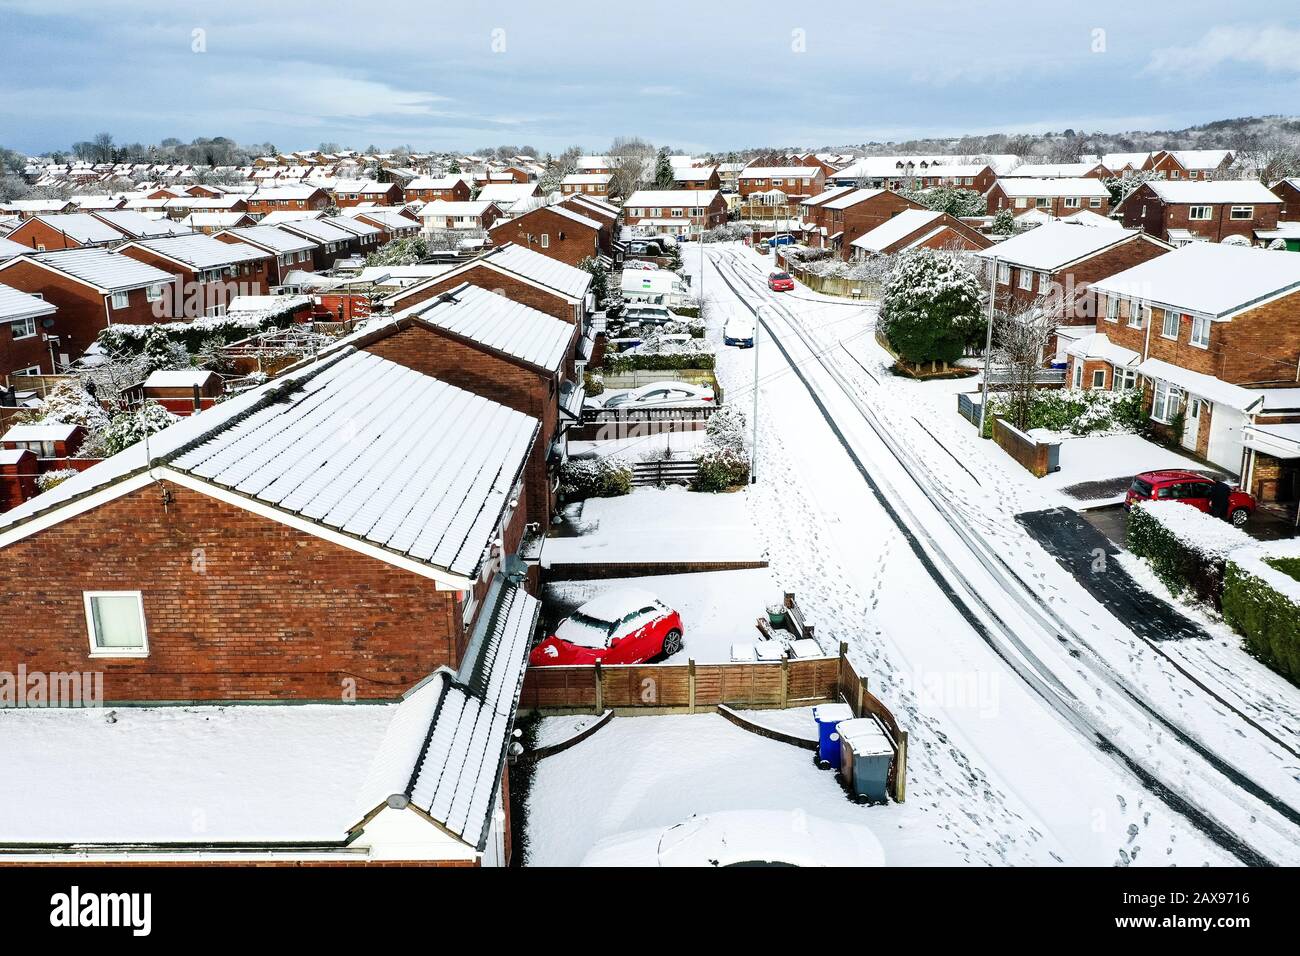 Aerial landscapes of Longton, Stoke on Trent covered in snow after a sudden storm came in. Heavy snowfall and snowy blizzards covering the city Stock Photo